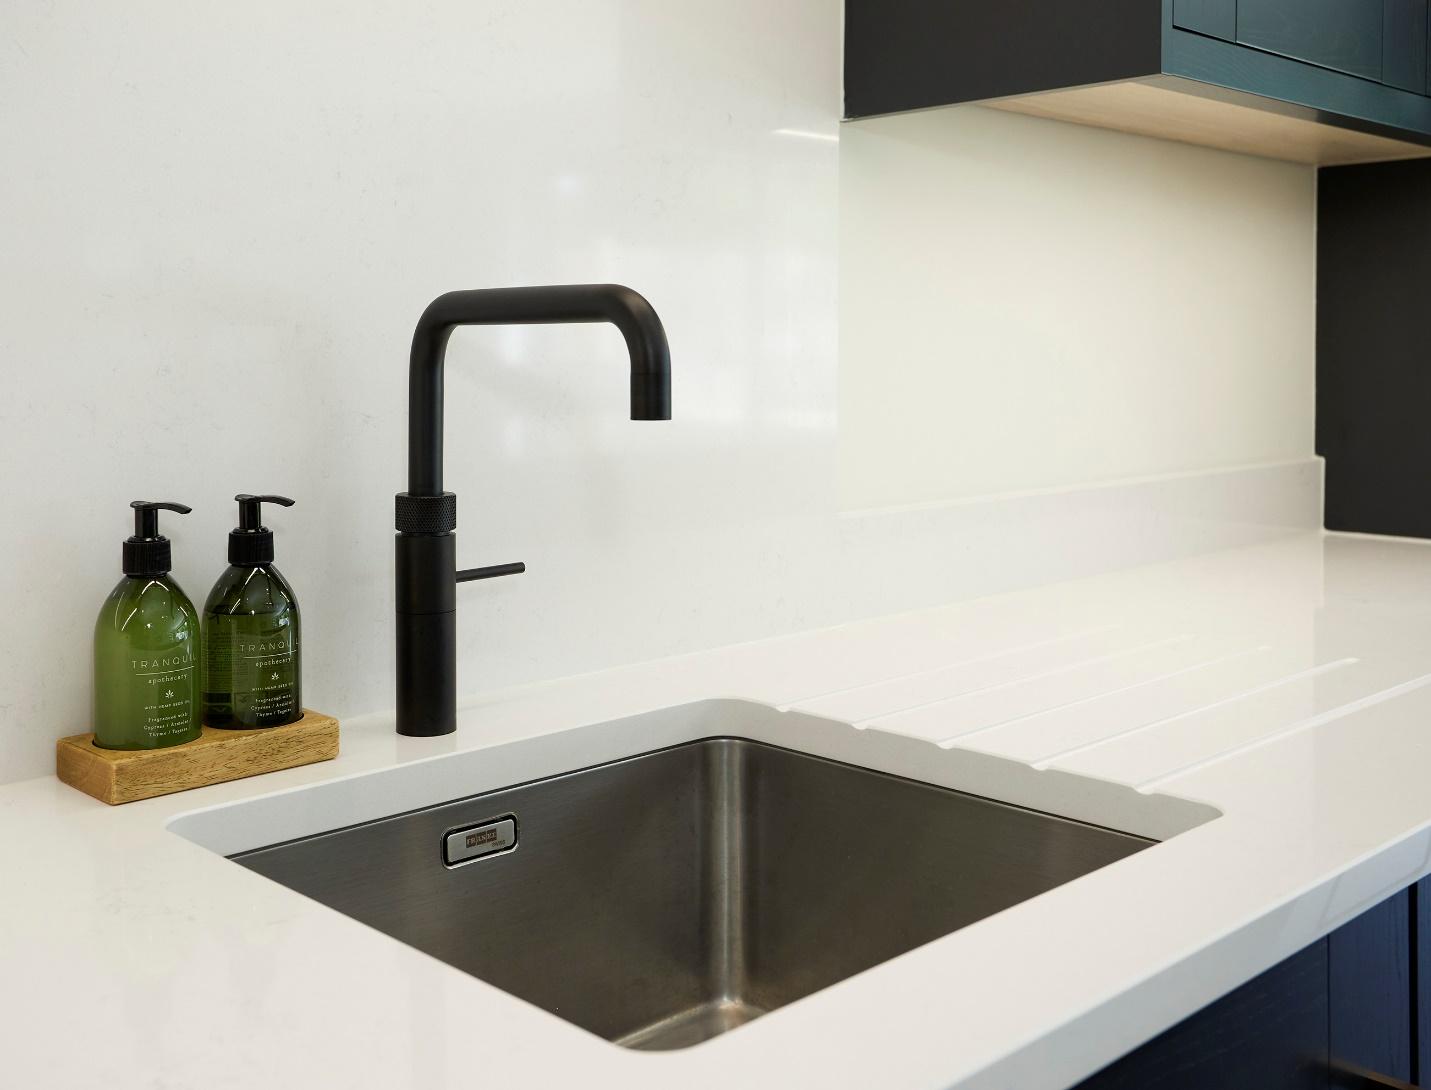 A sink and faucet in a kitchen

Description automatically generated